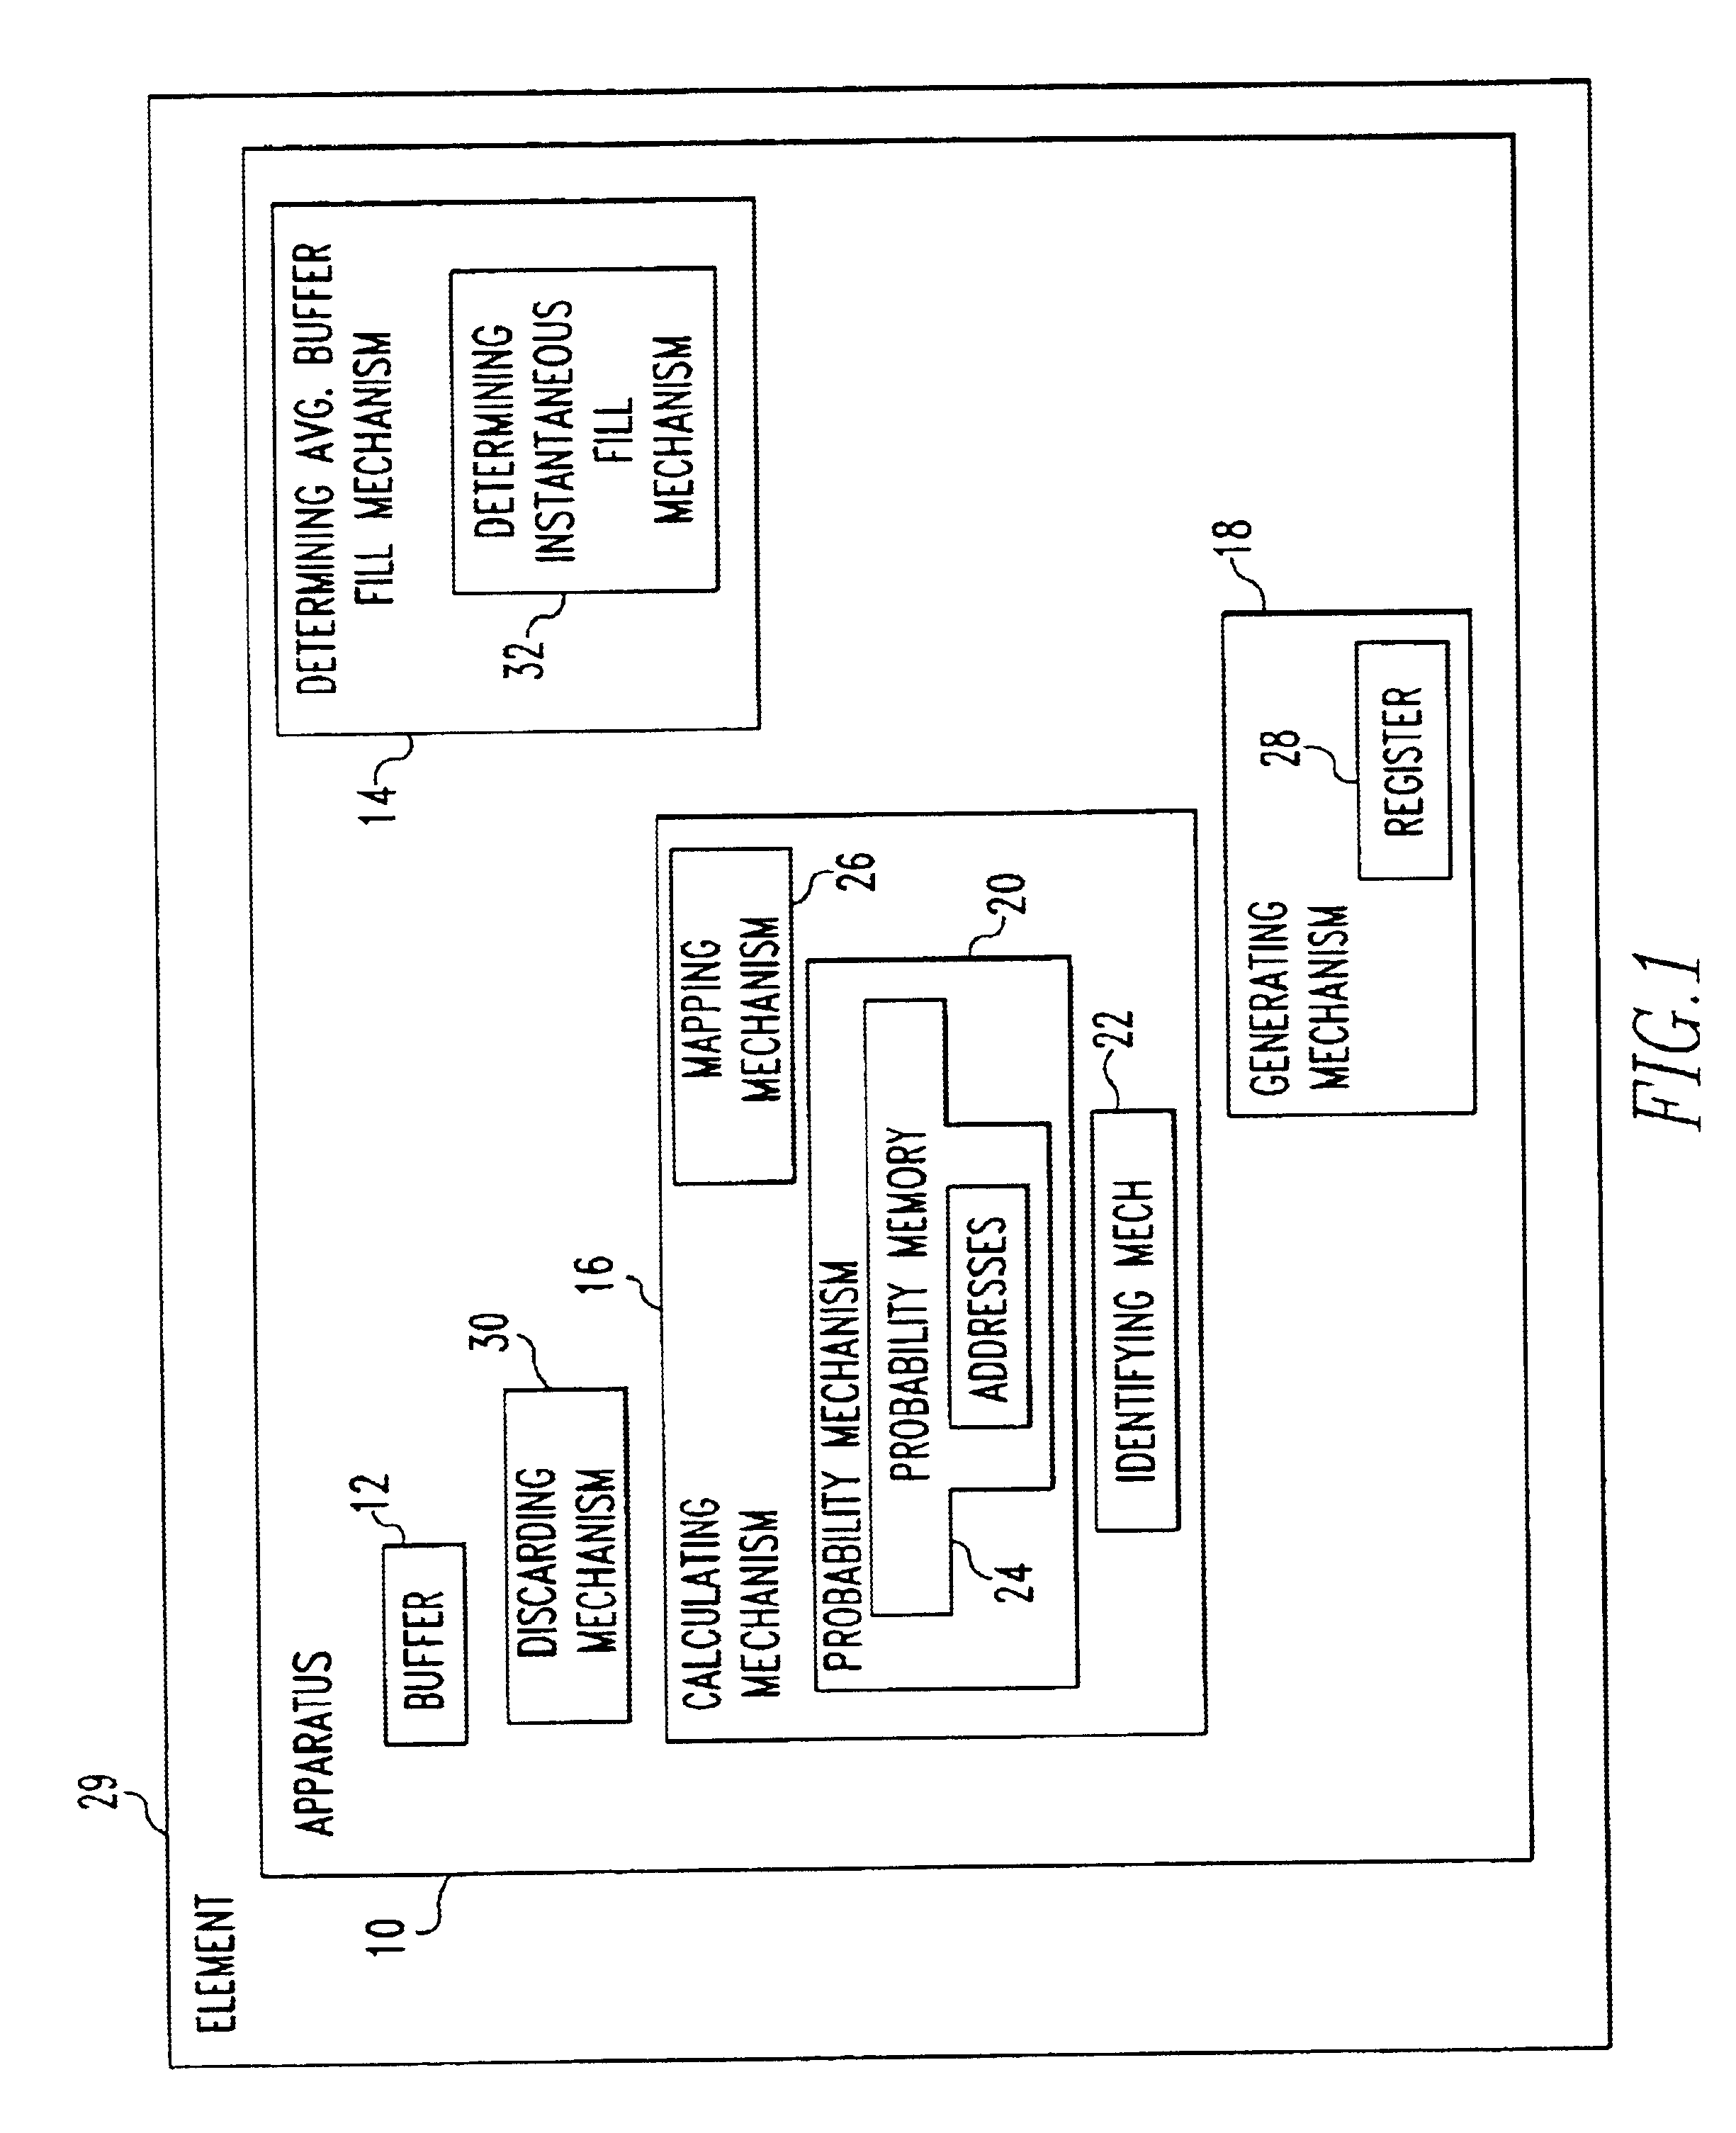 Approximation of the weighted random early detection buffer admittance algorithm